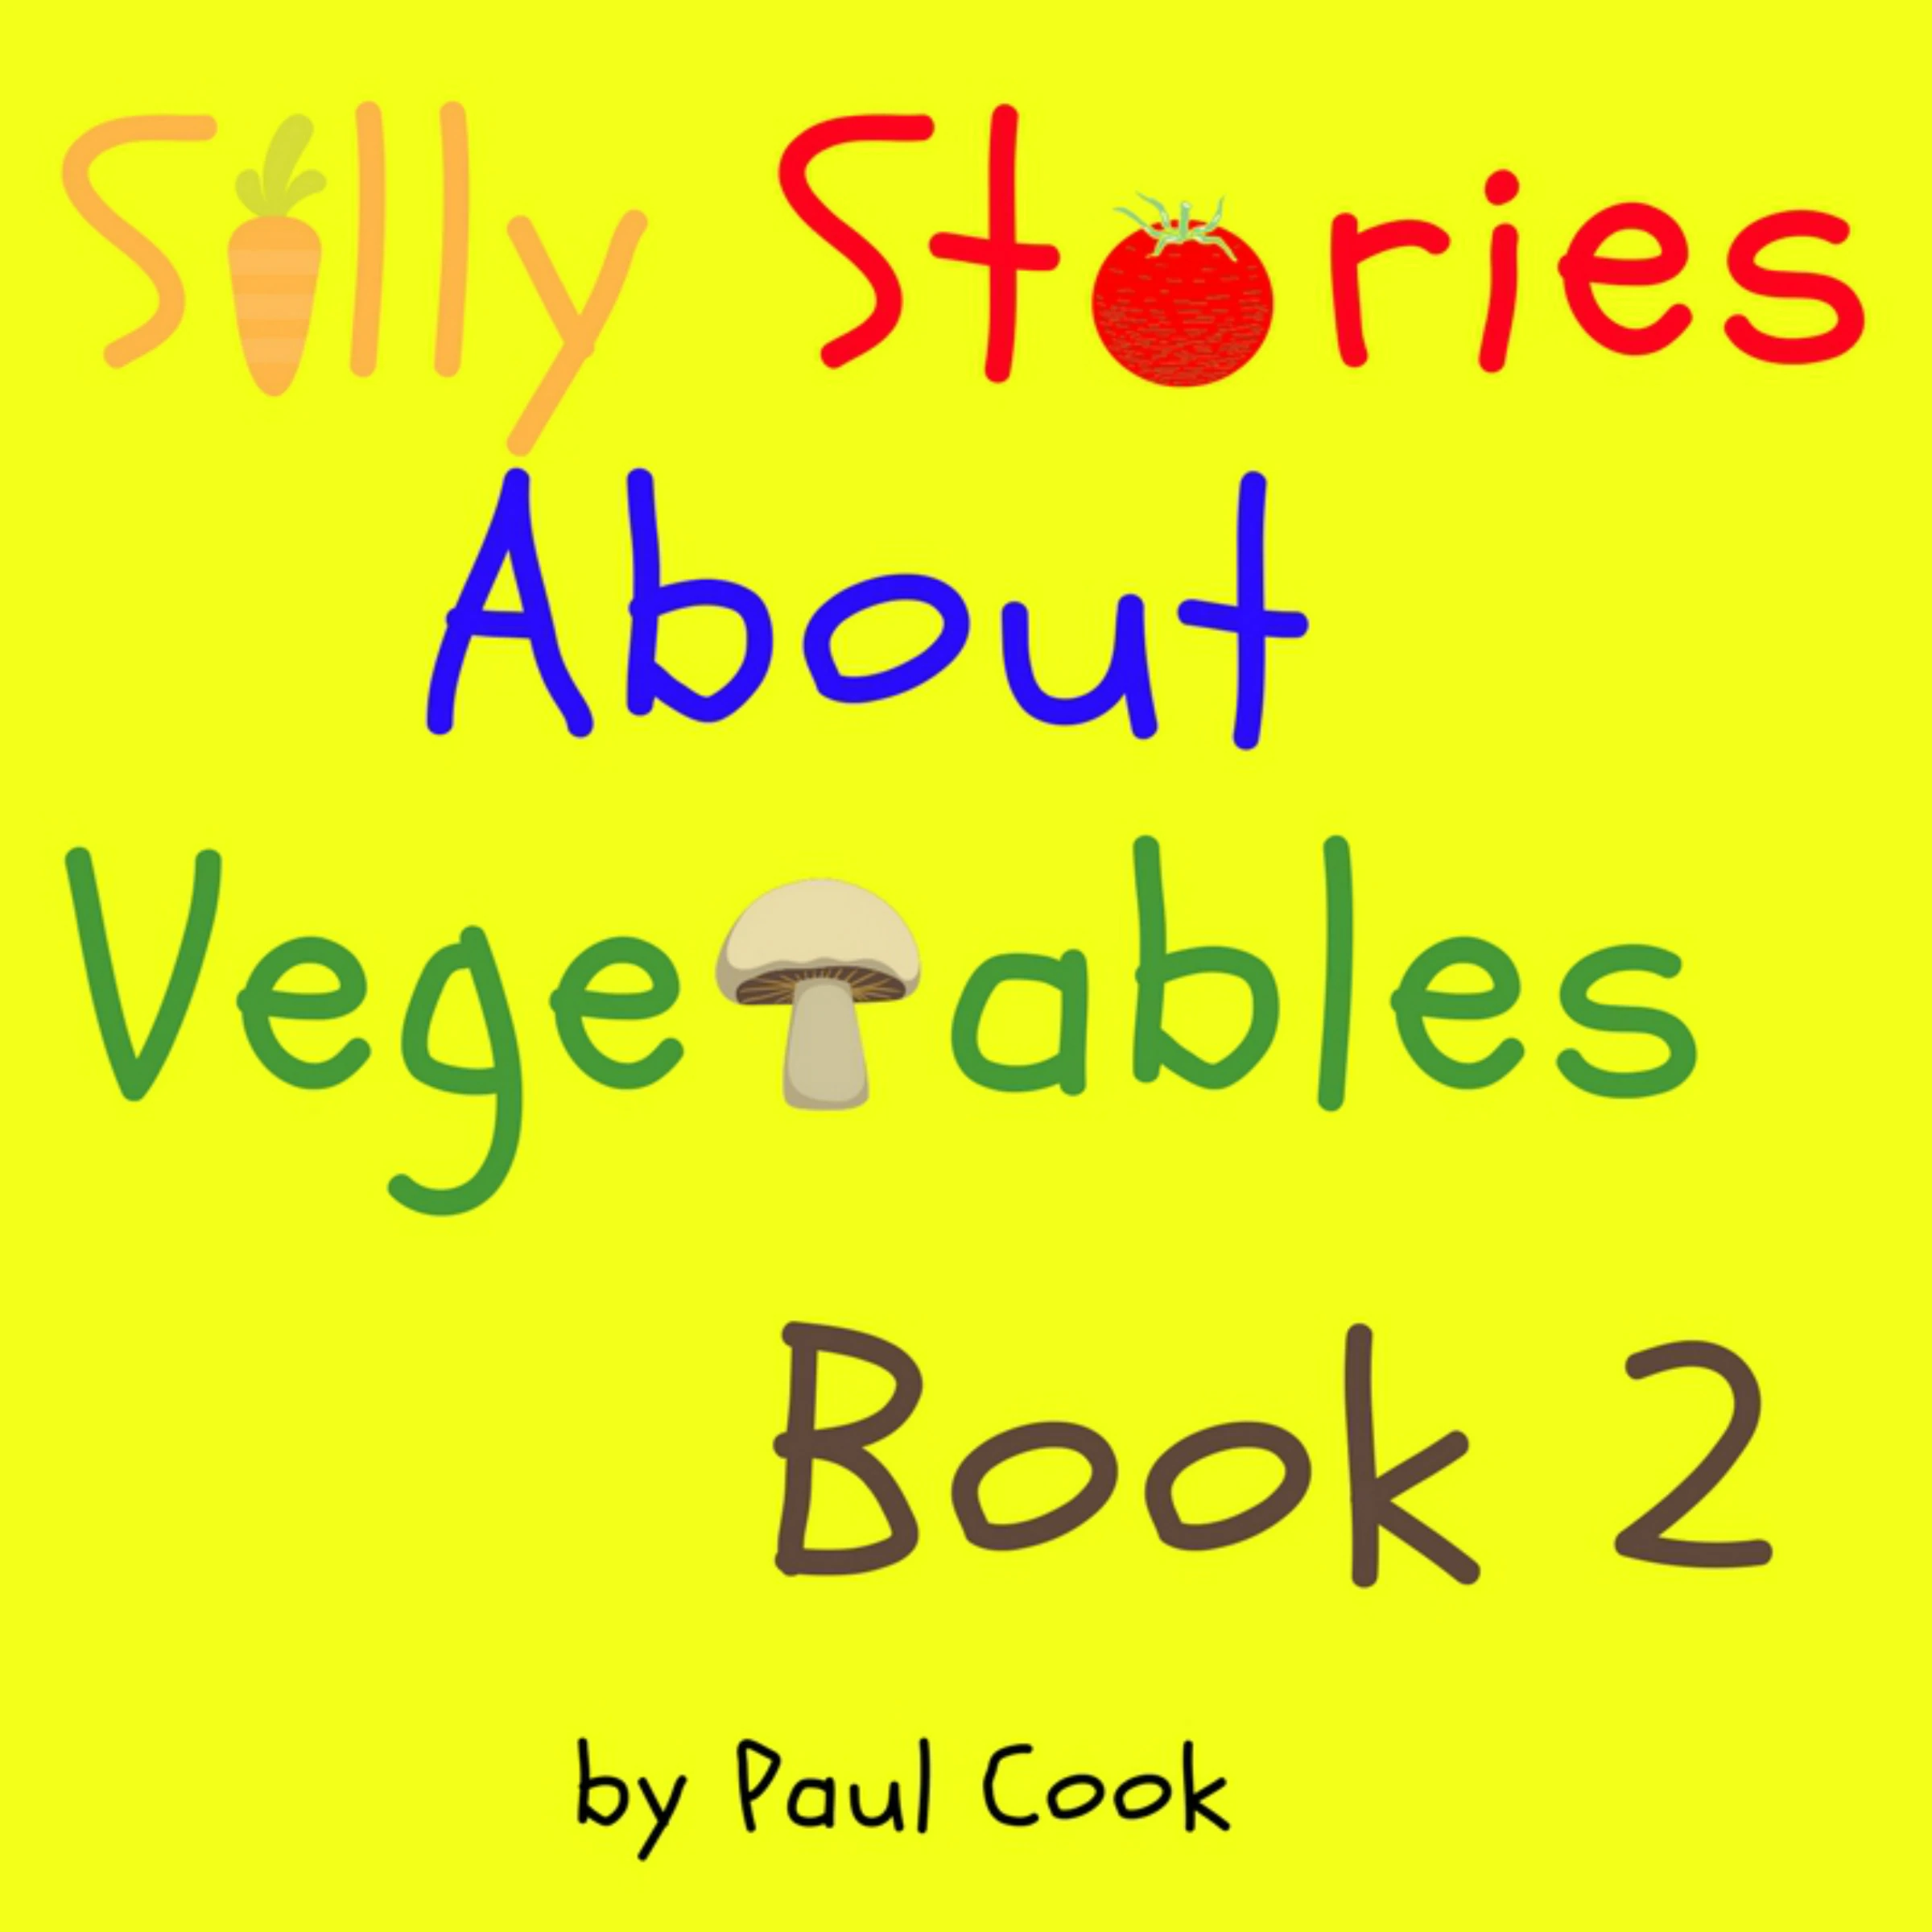 Silly Stories About Vegetables Book 2 Audiobook by Paul Cook